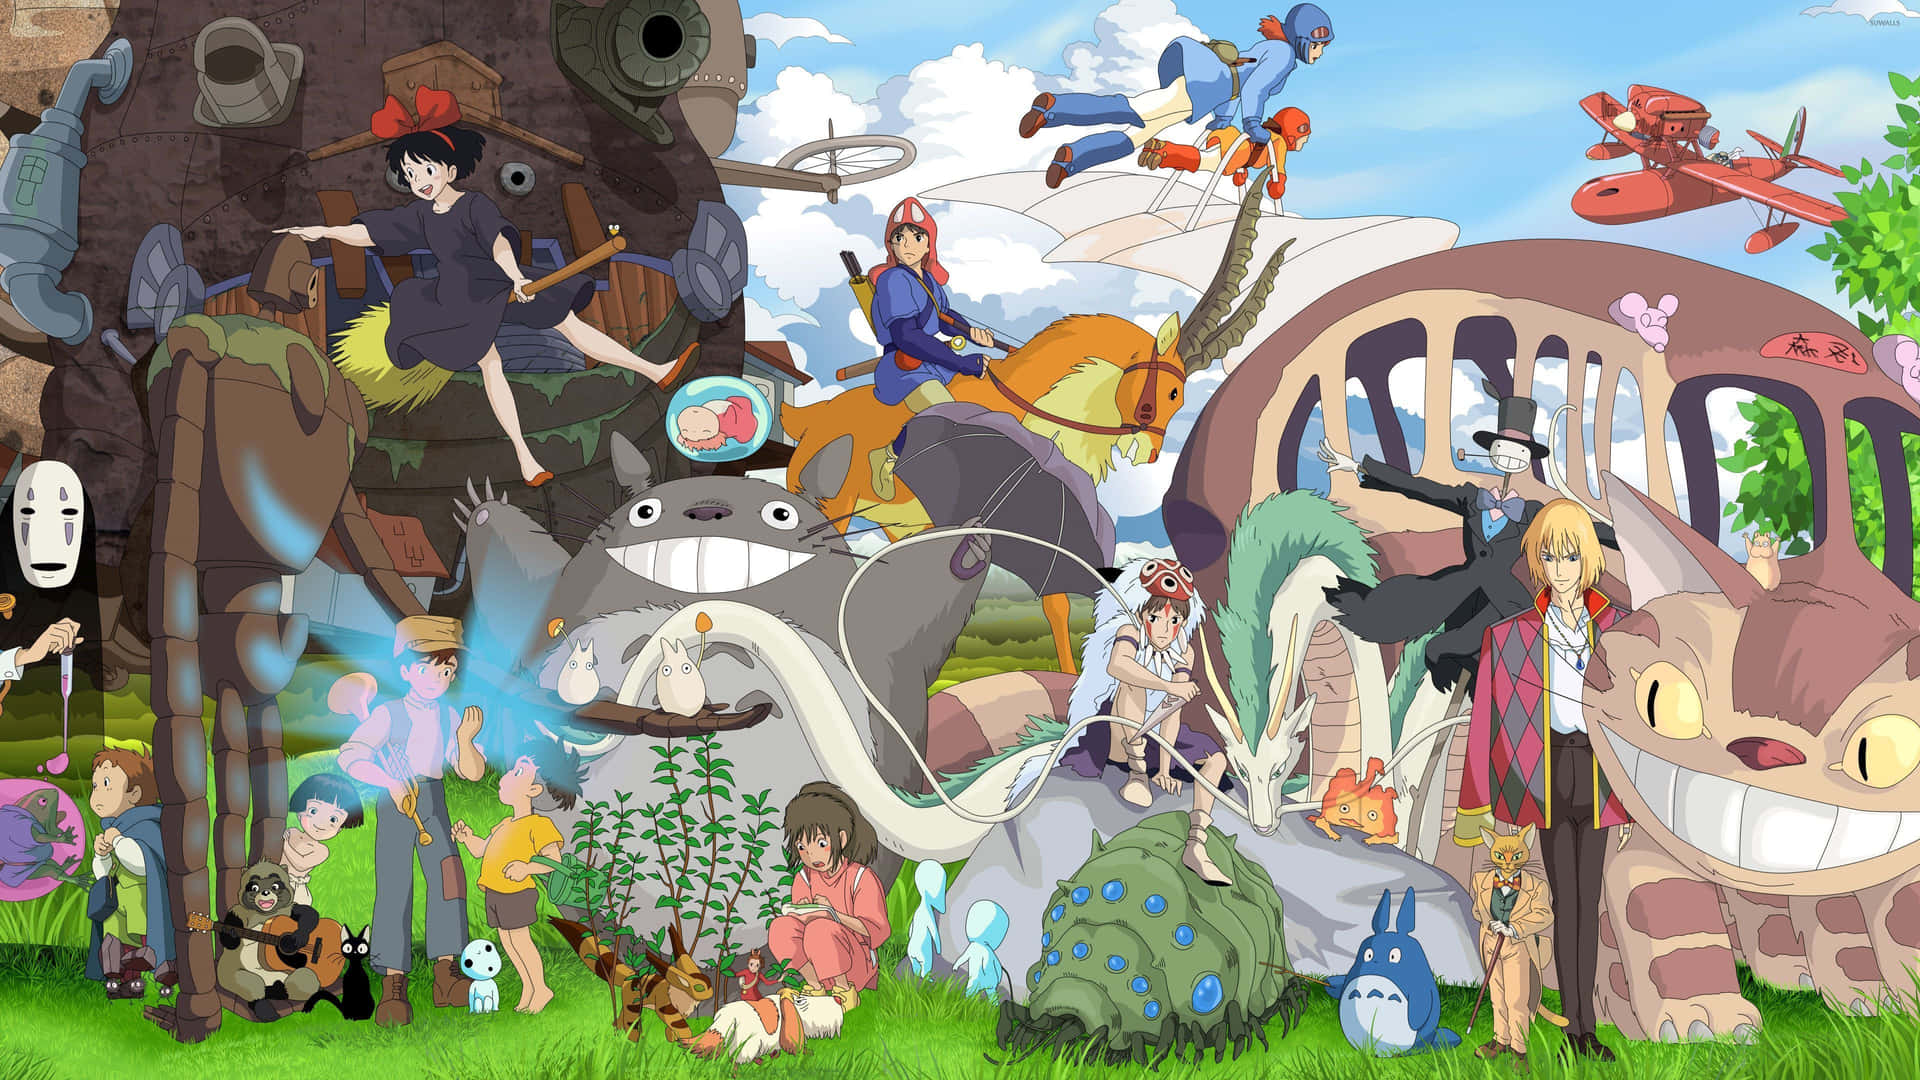 A surrealistic and creative desktop background featuring Studio Ghibli's most beloved characters Wallpaper